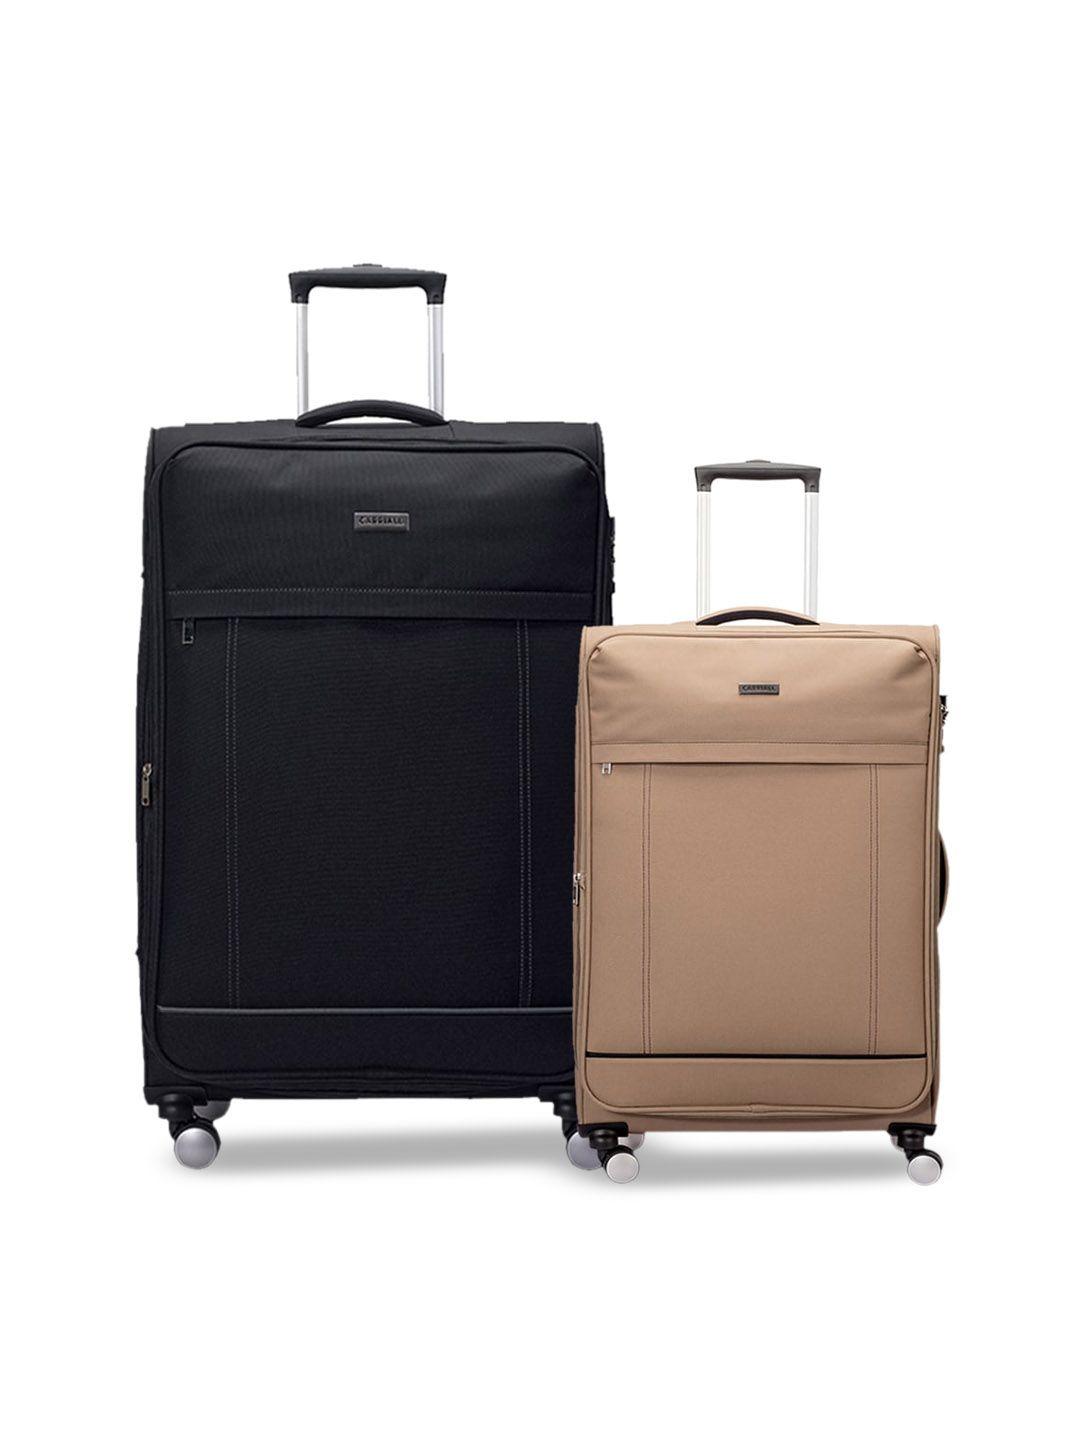 carriall black & beige carriall large & small combo set of 2 luggage